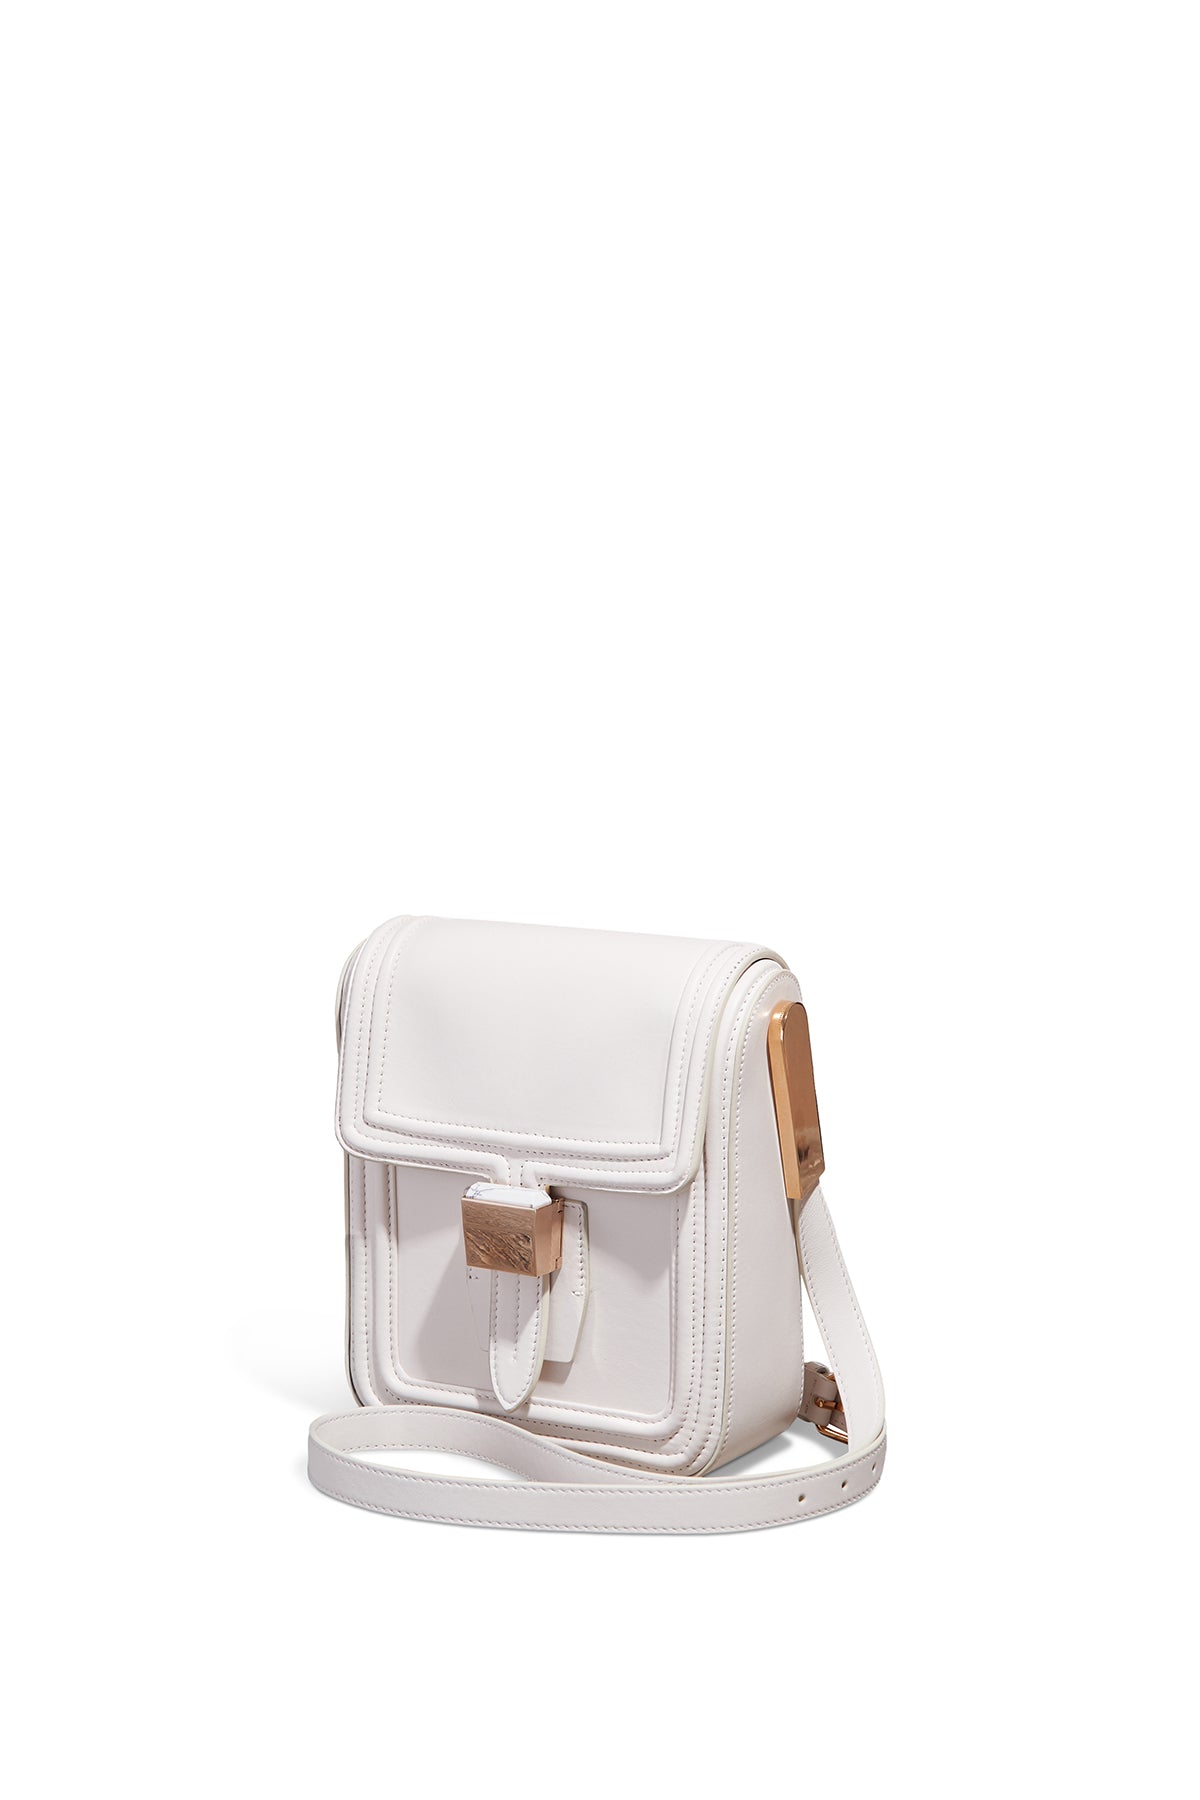 Marvelle Crossbody Bag in Ivory Nappa Leather